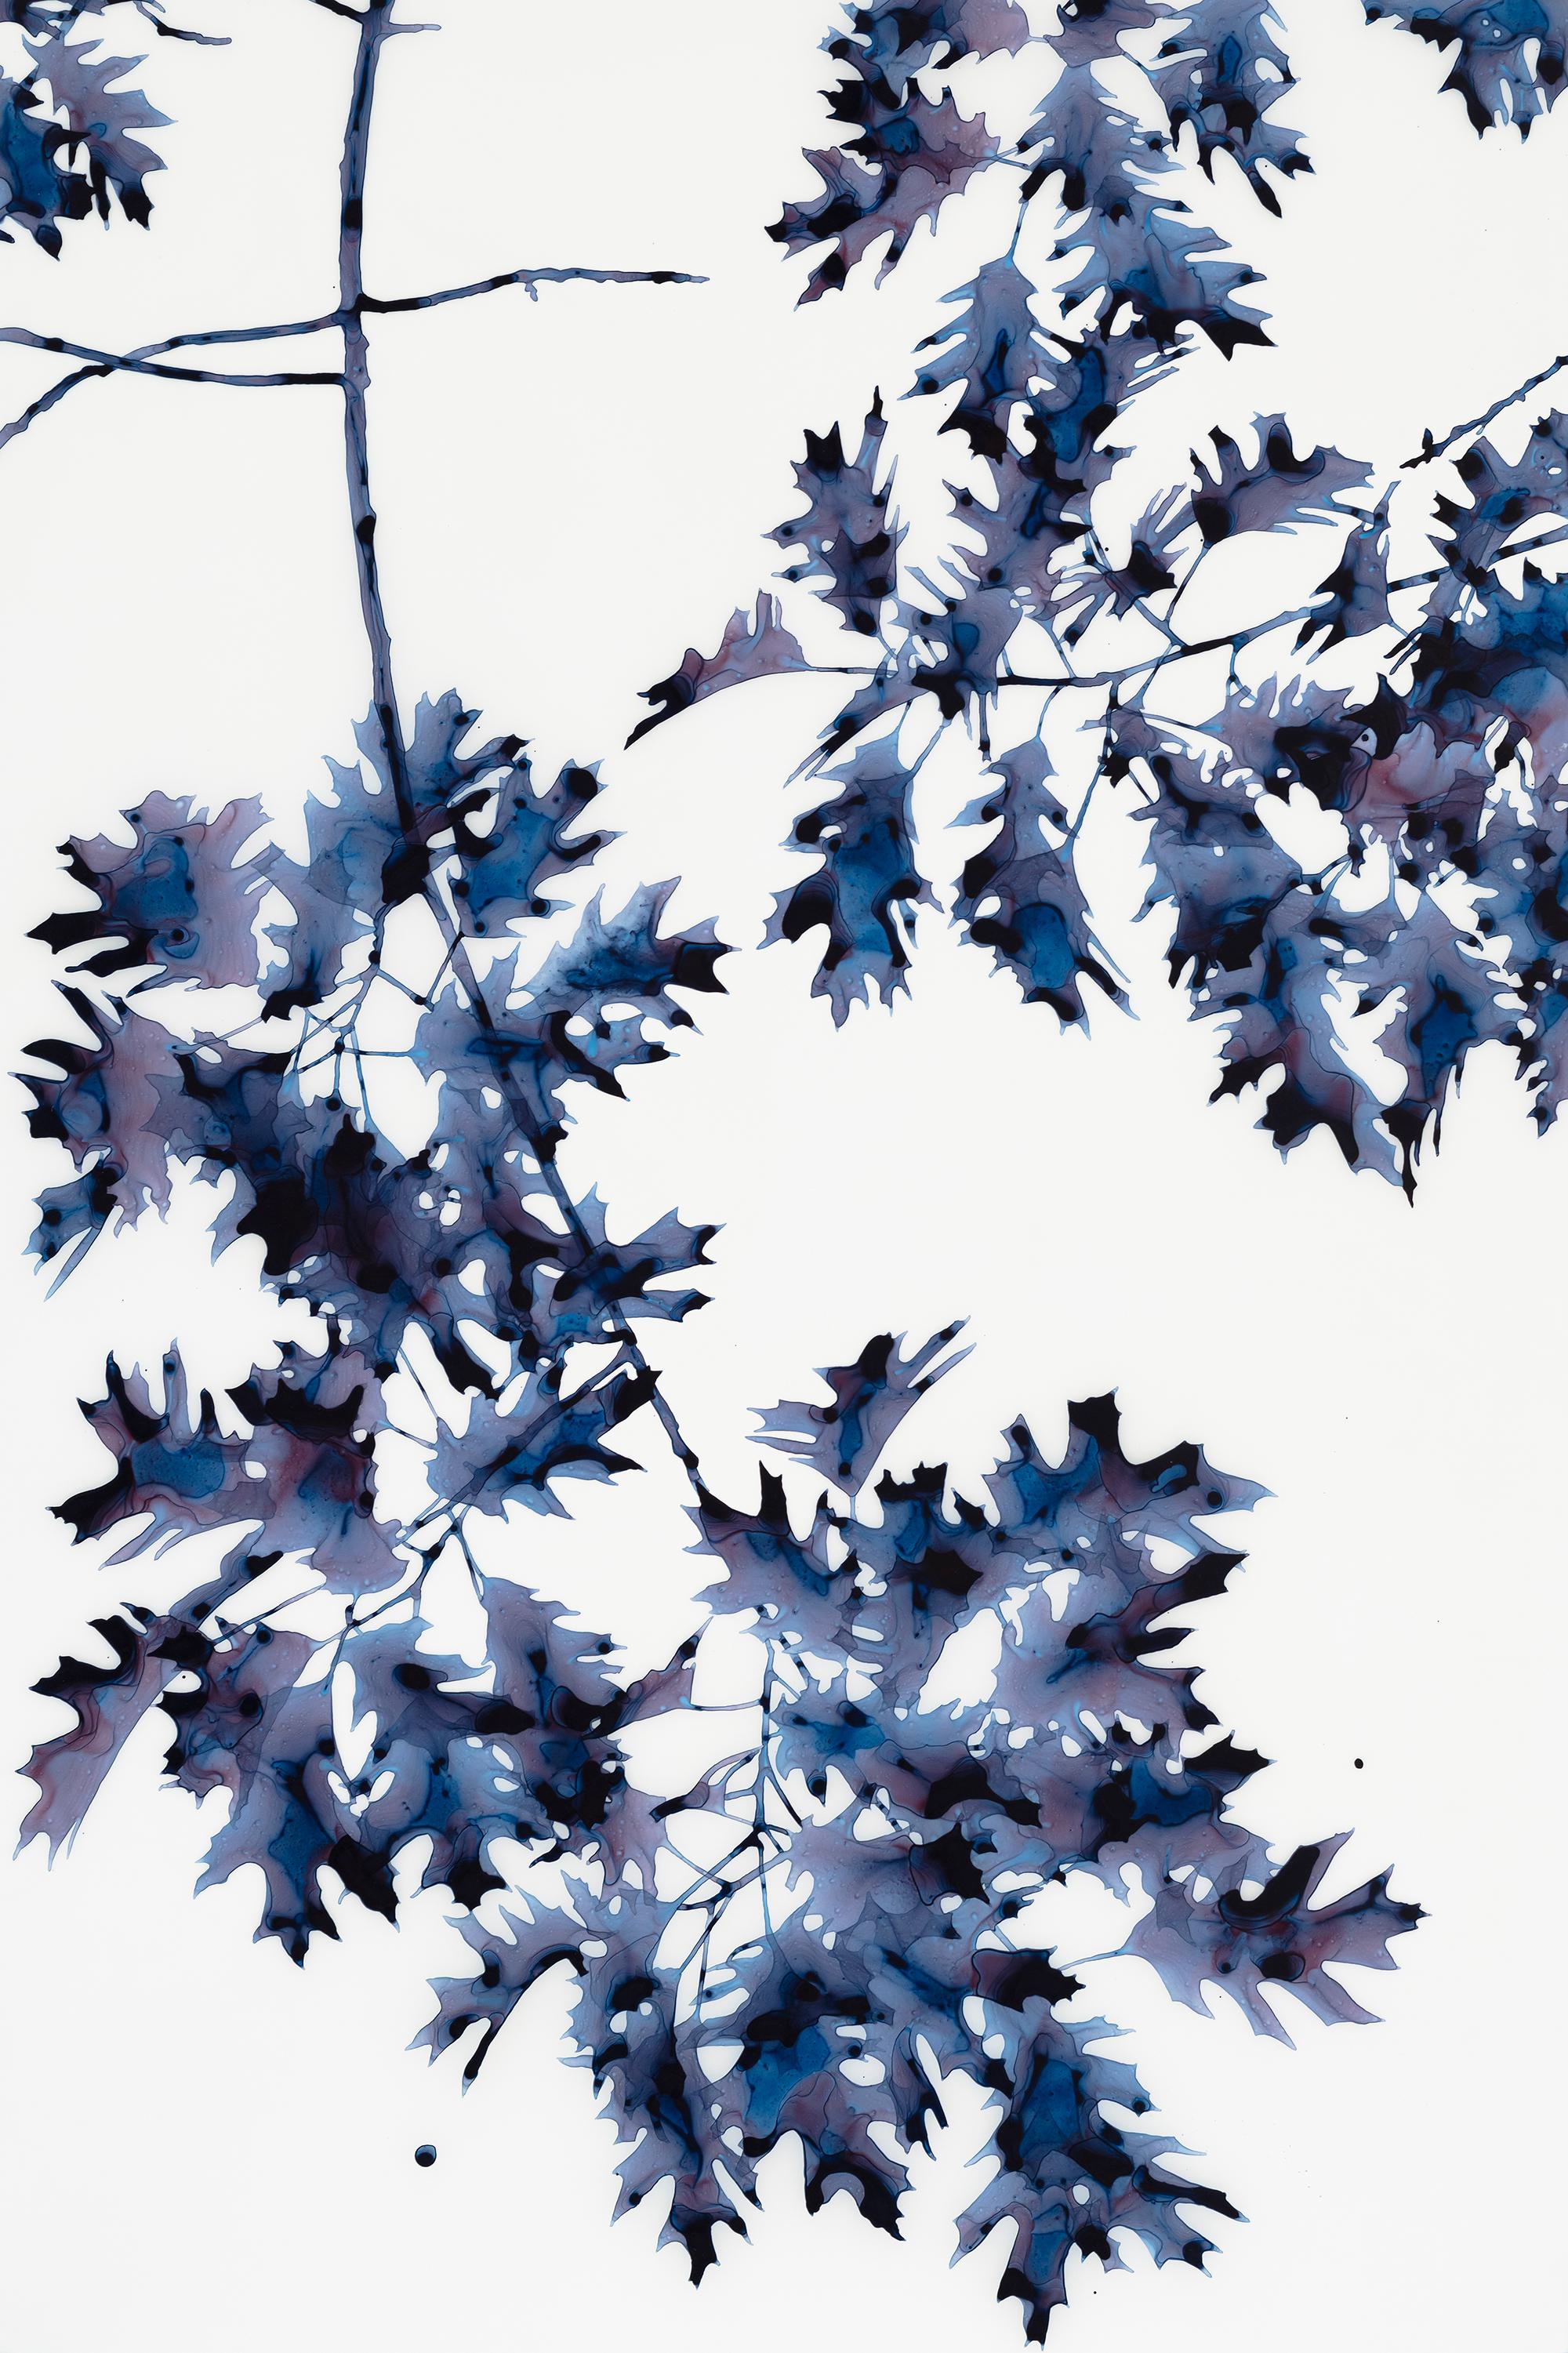 Dark indigo blue oak leaf foliage with hints of dark burgundy graces delicate branches on the pristine white background of this large vertical painting in acrylic on Mylar mounted on acrylic panel. Framed in a solid white wooden float frame. Signed,